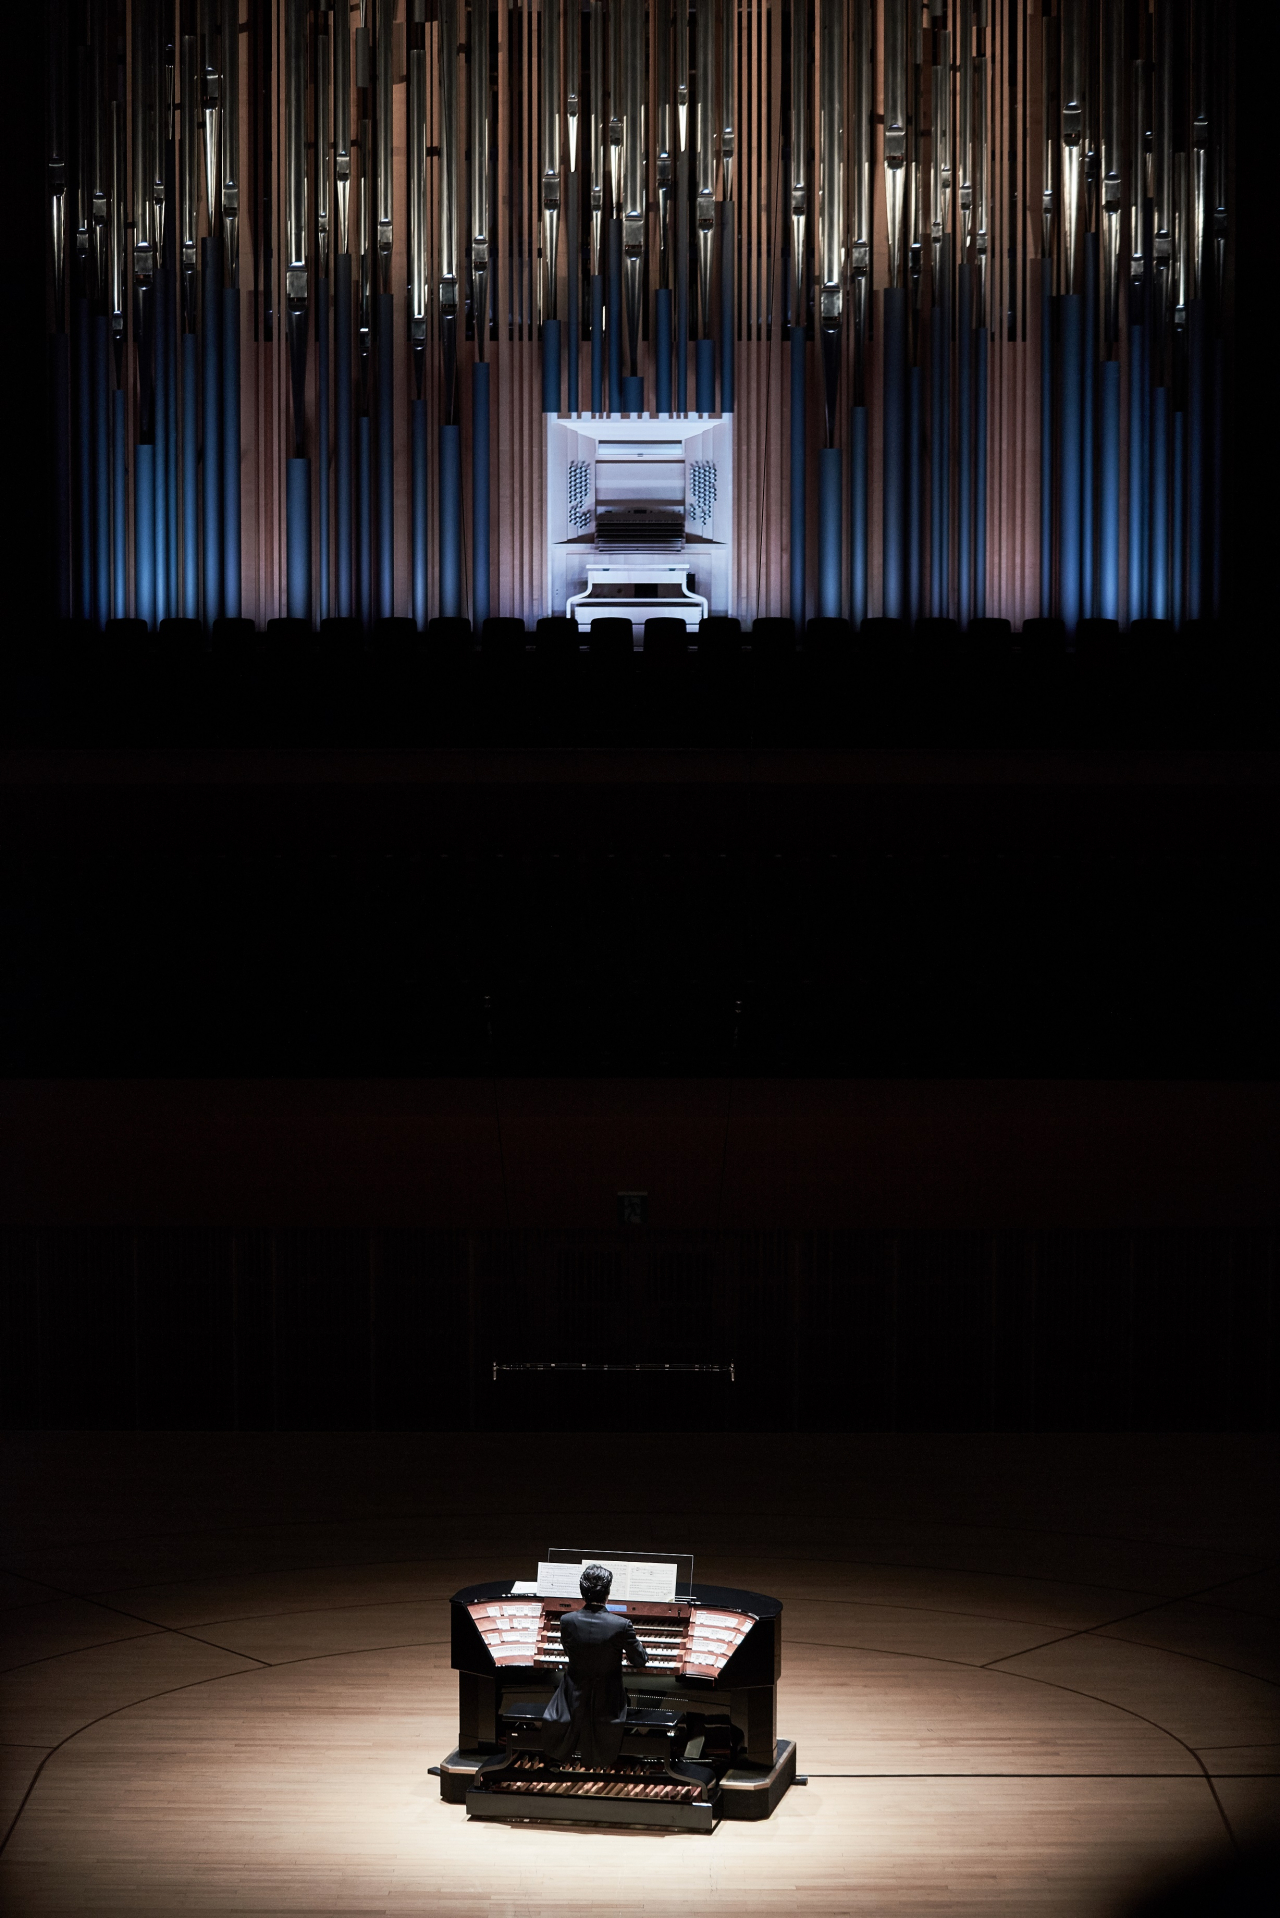 Organist Cho Jae-hyuck plays the pipe organ during an “Organ Odyssey” concert held earlier this year at Lotte Concert Hall in Seoul. (Lotte Foundation for Arts)